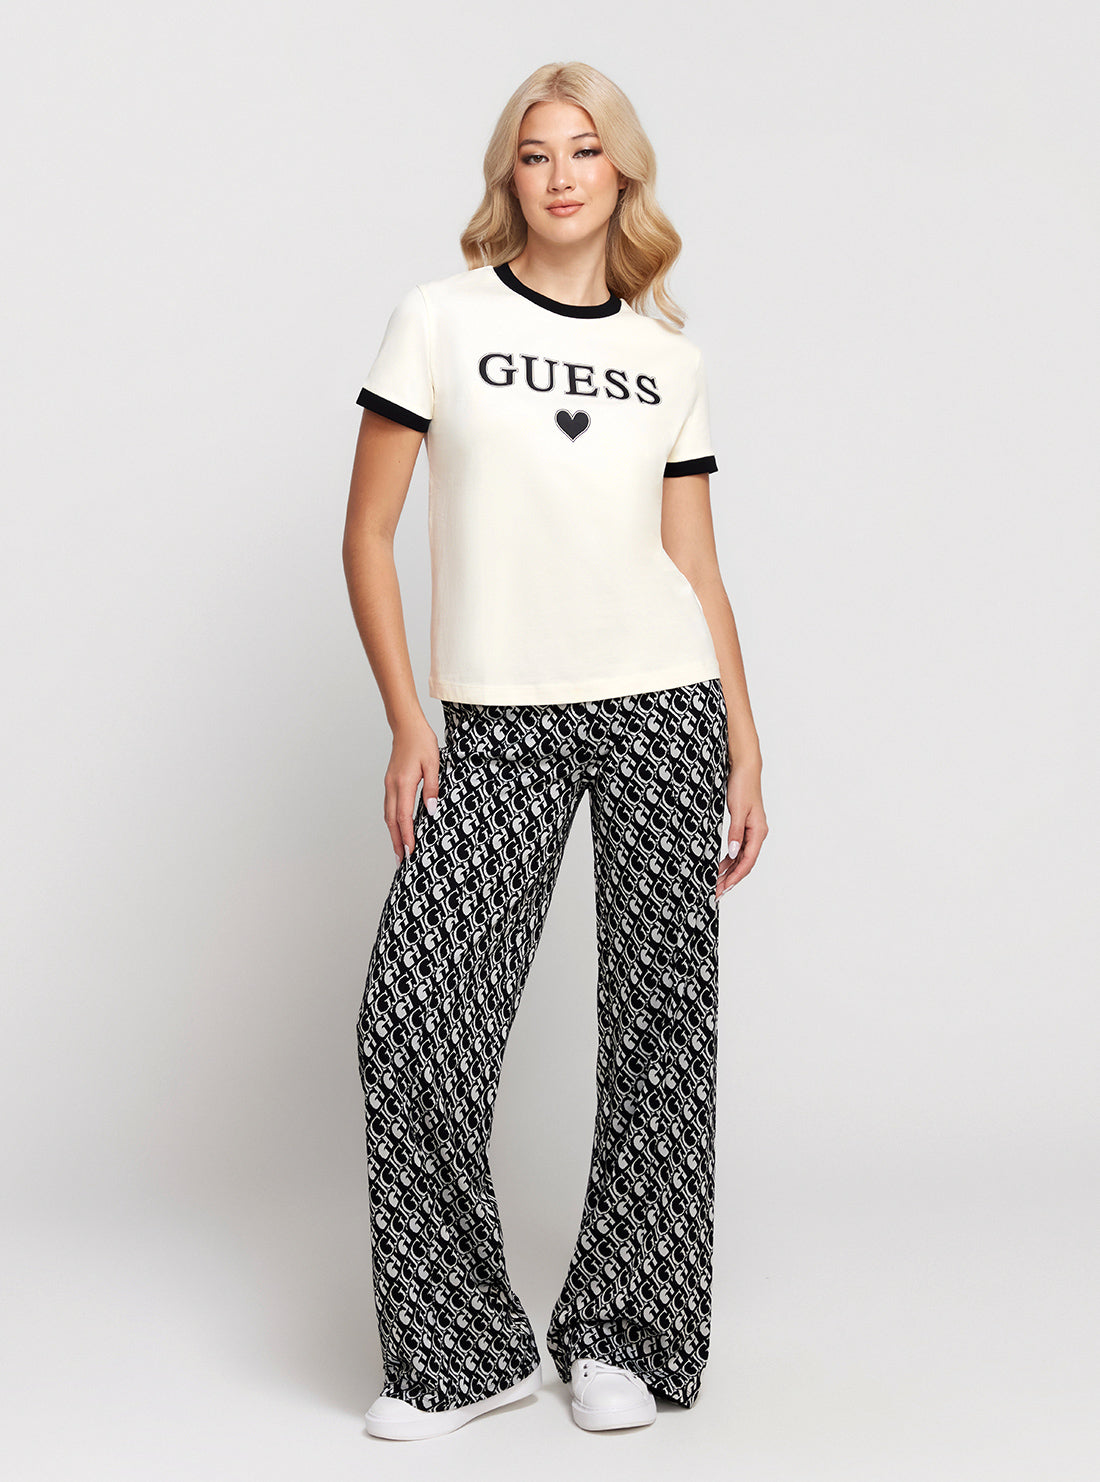 GUESS White Caryl Short Sleeve T-Shirt full view